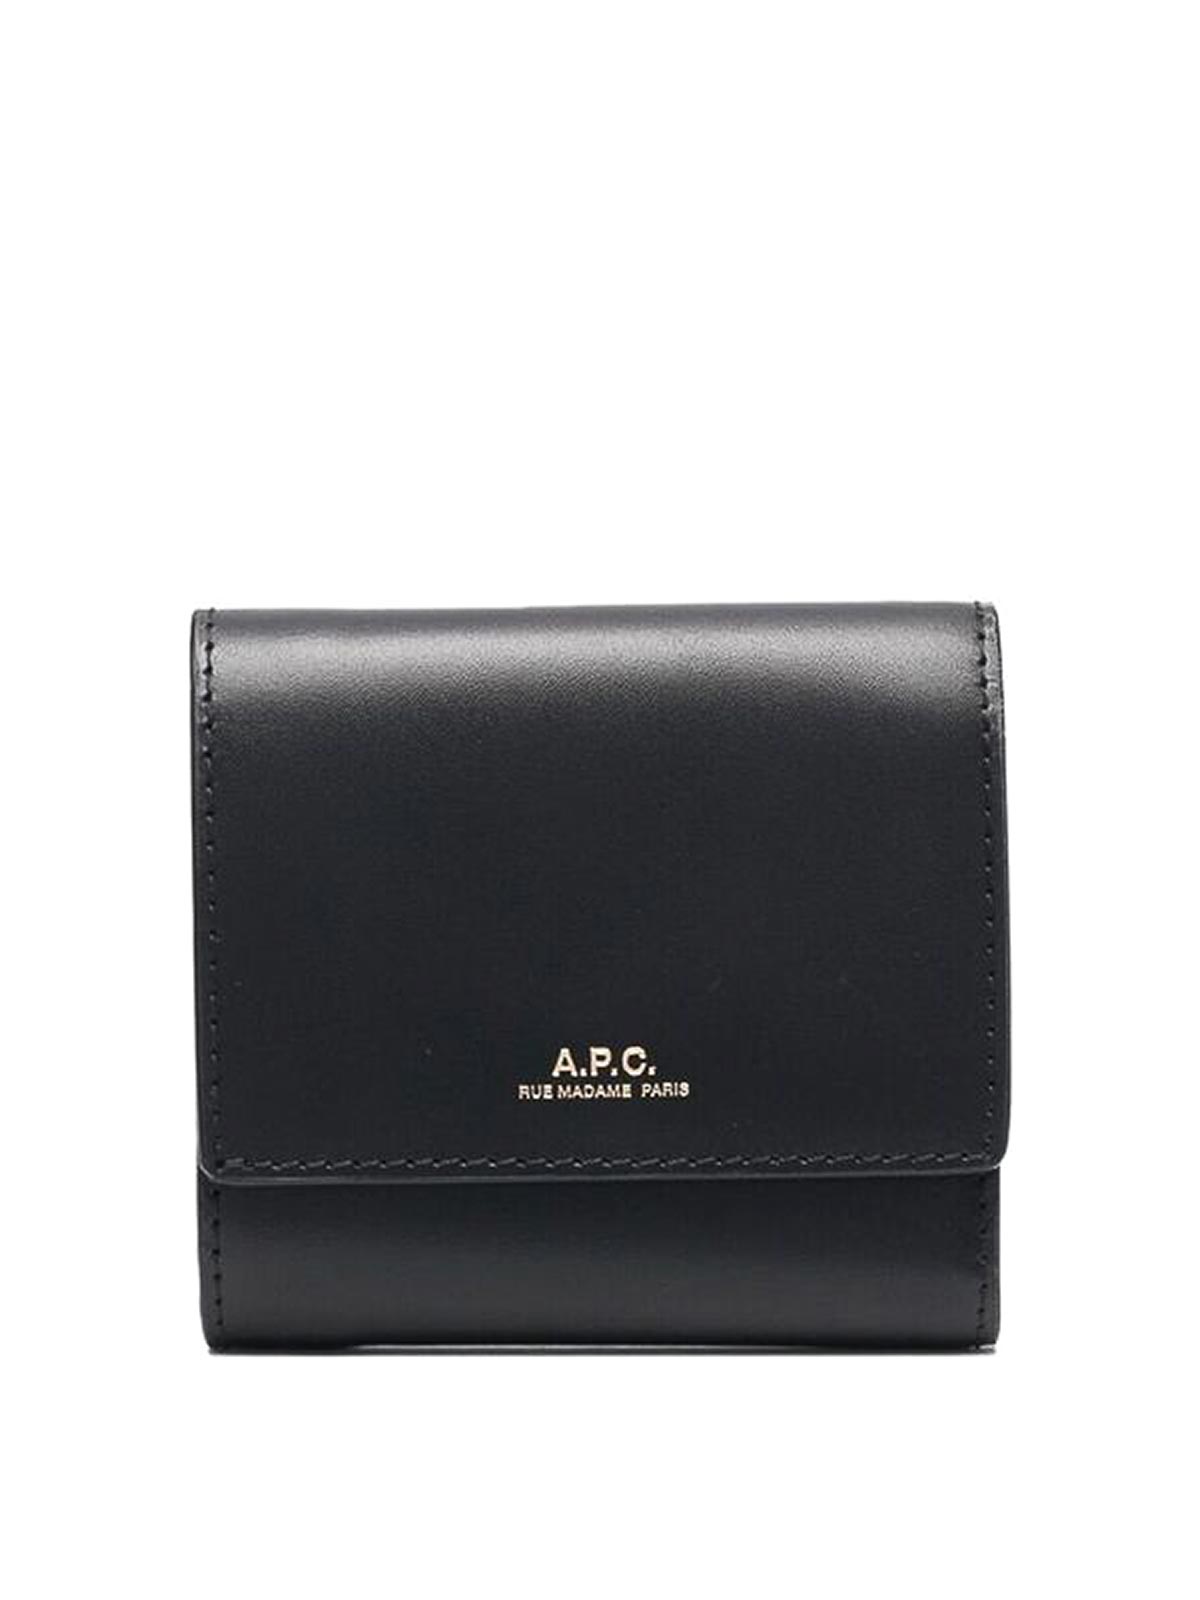 Apc Trifold Leather Wallet In Black